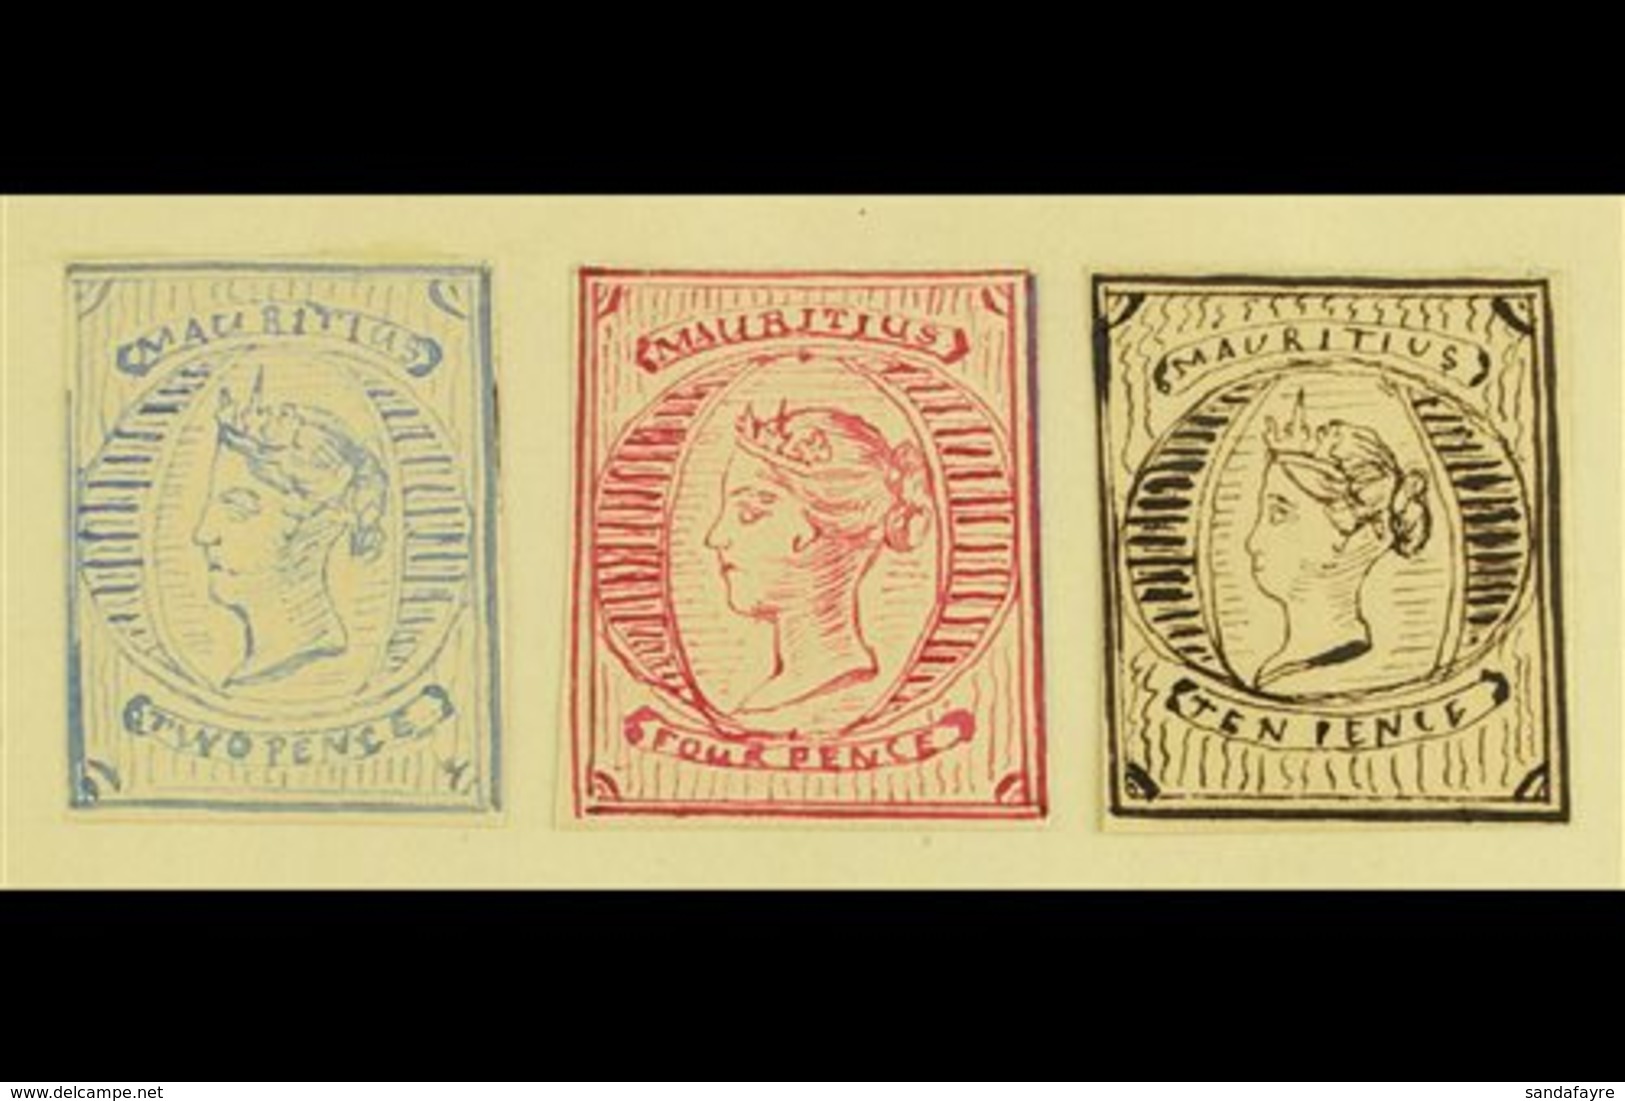 \Y 1861 HAND PAINTED STAMPS\Y Unique Miniature Artworks Created By A French "Timbrophile" In 1861. Three Stamps With Cen - Mauritius (...-1967)